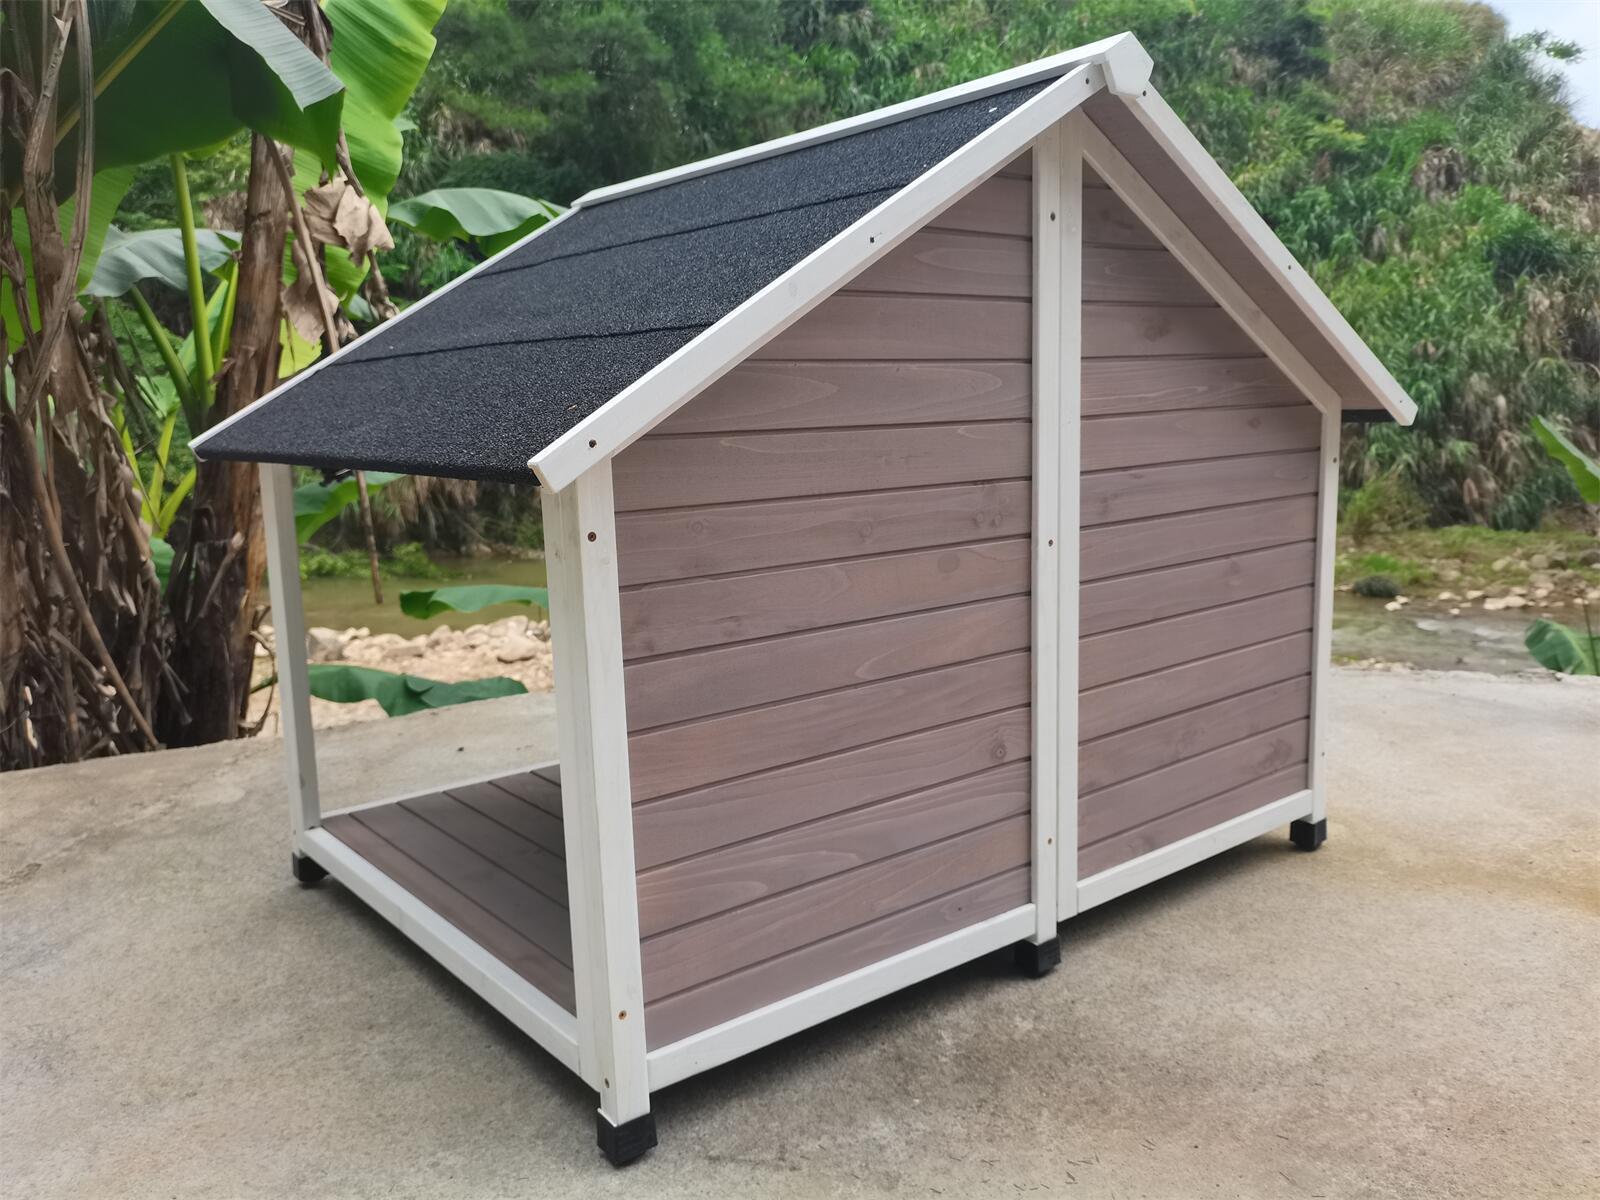 L Timber Pet Dog Kennel House Puppy Wooden Timber Cabin 130x105x100cm Grey